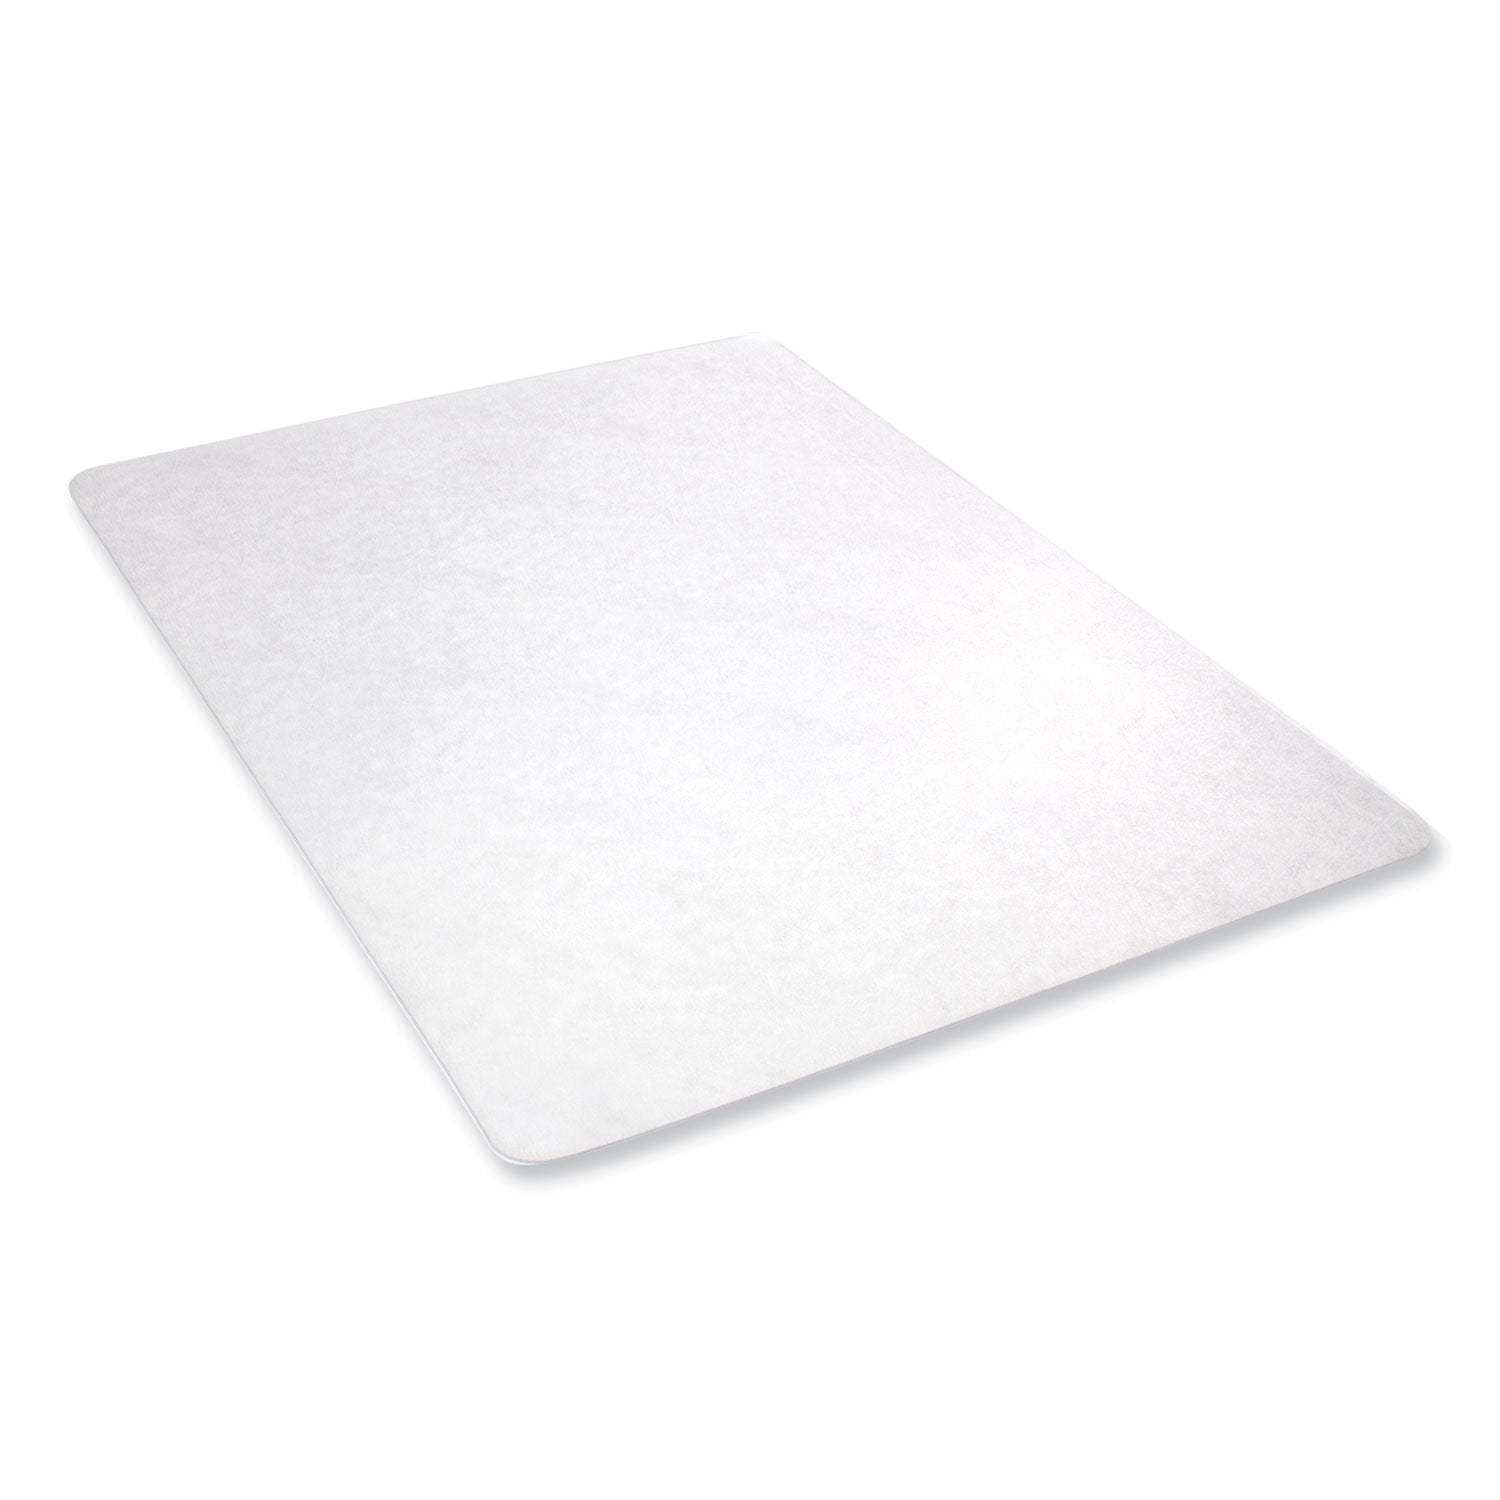 economat-all-day-use-chair-mat-for-hard-floors-flat-packed-45-x-53-clear_defcm2e242 - 1